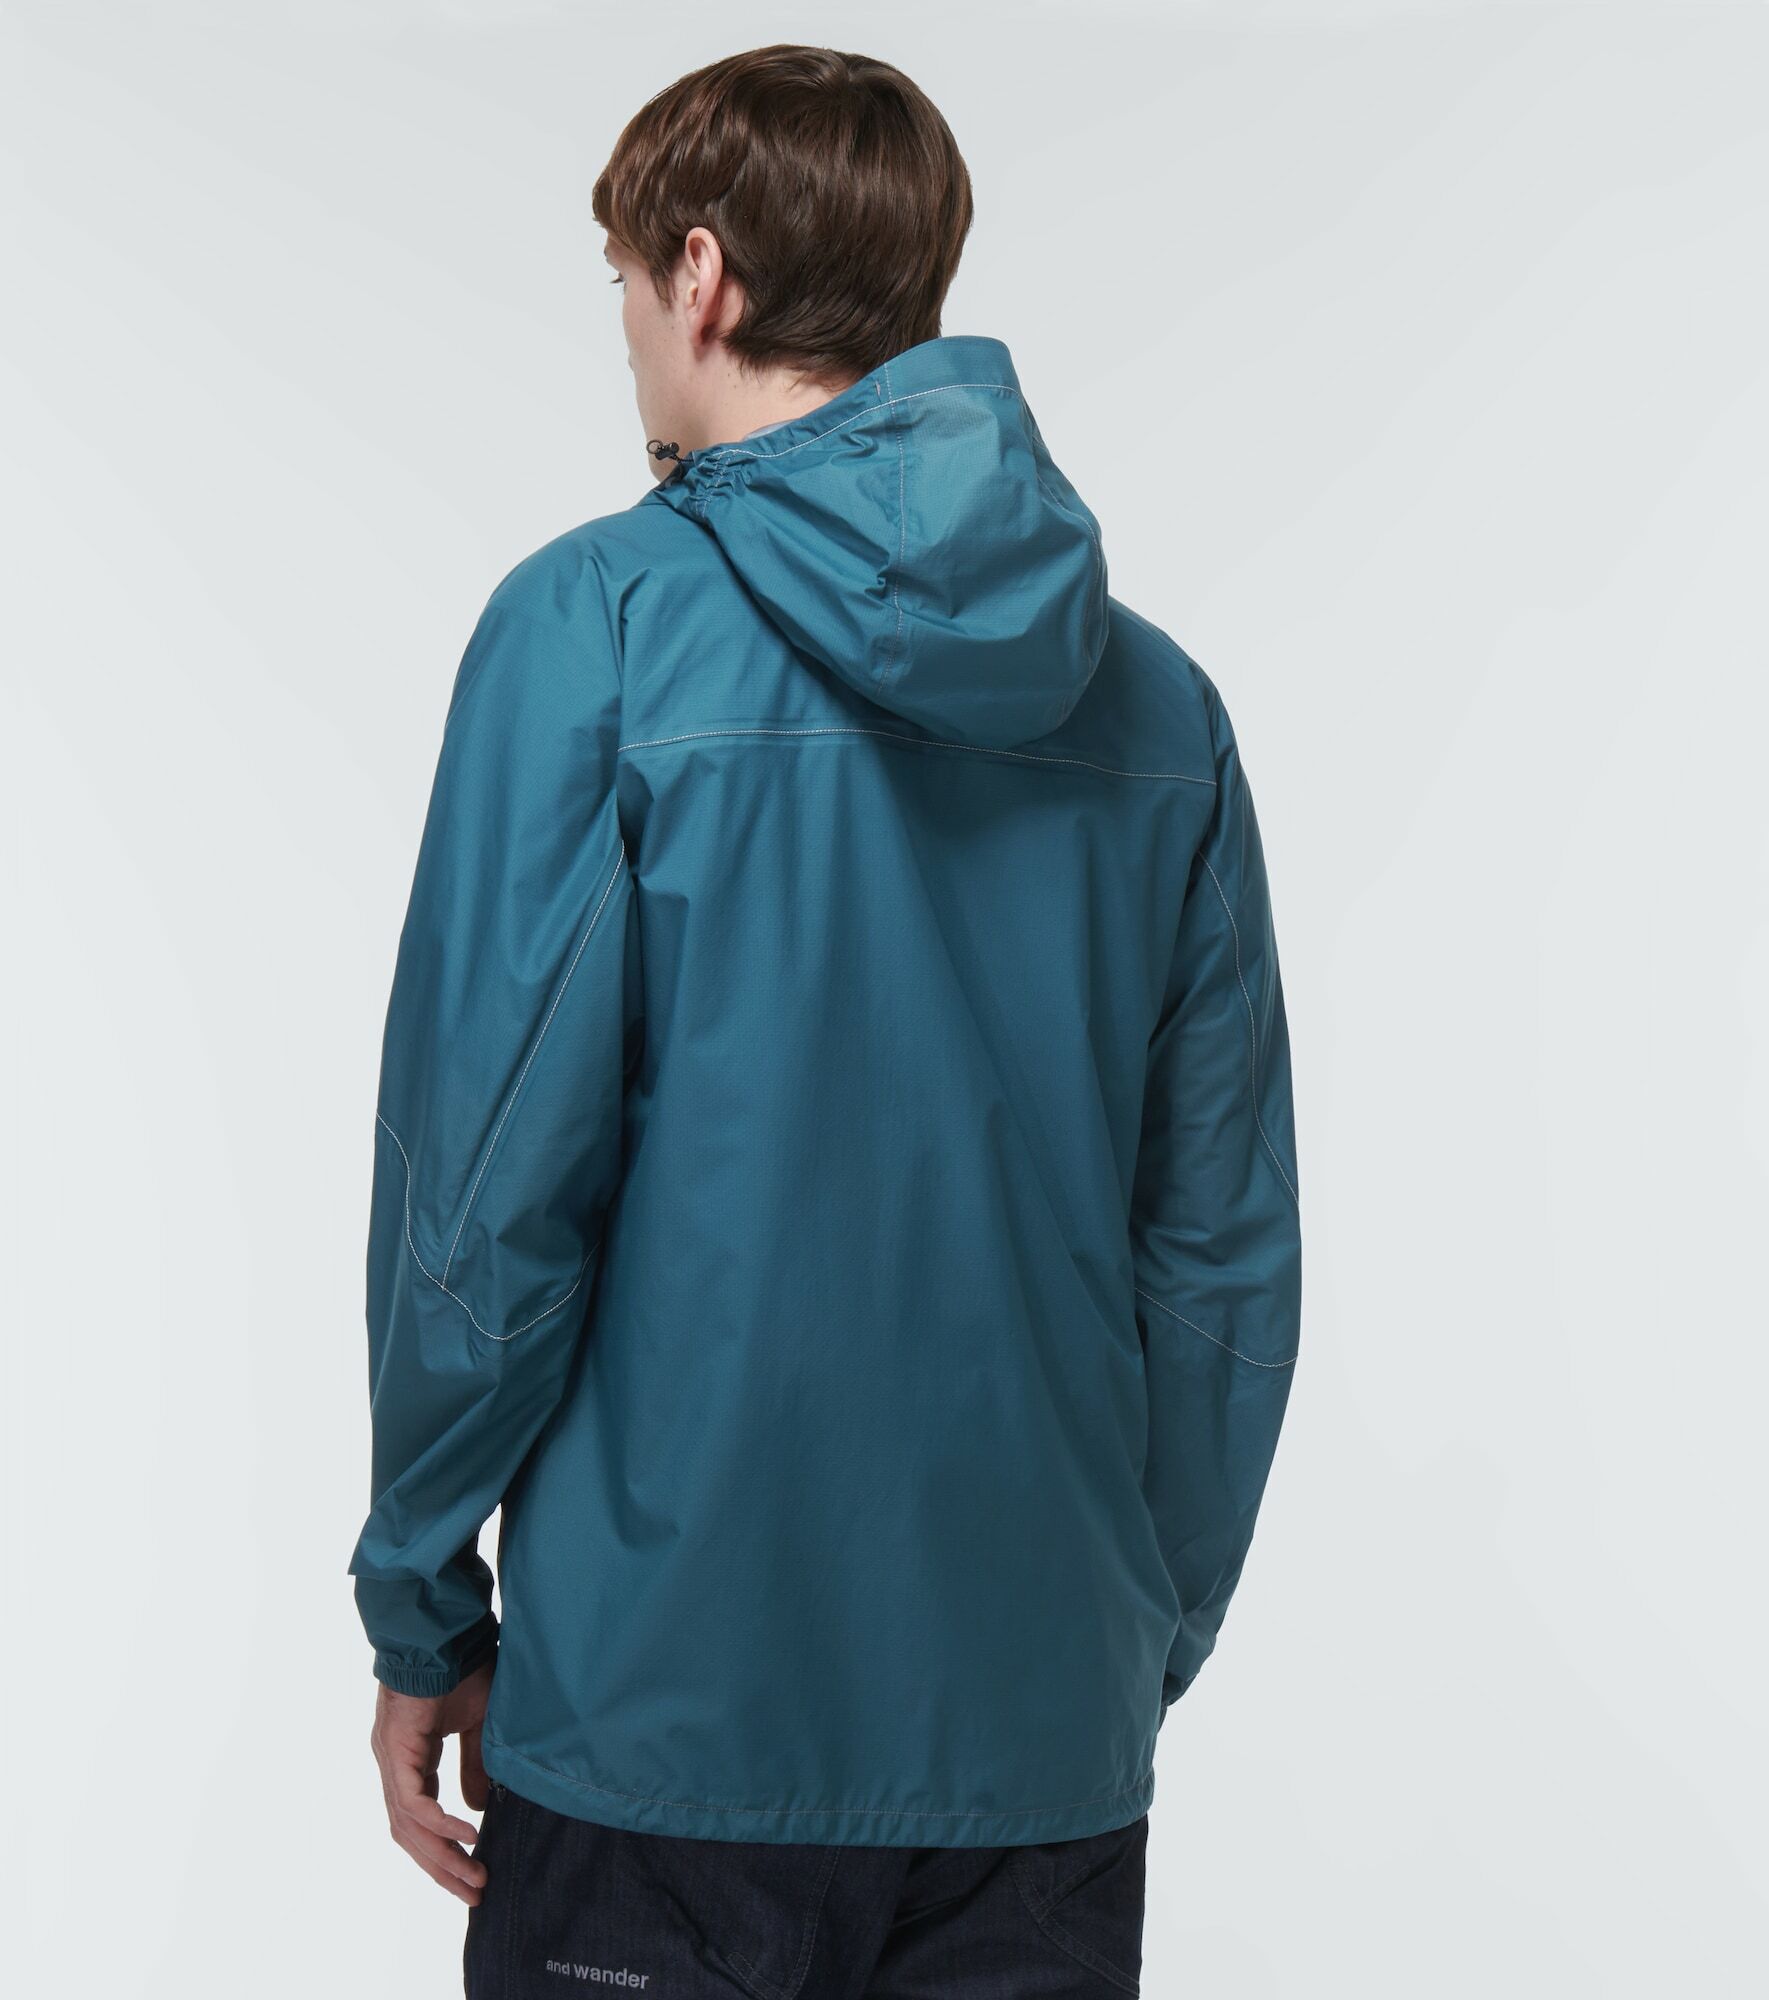 And Wander - 3L UL hooded jacket and Wander